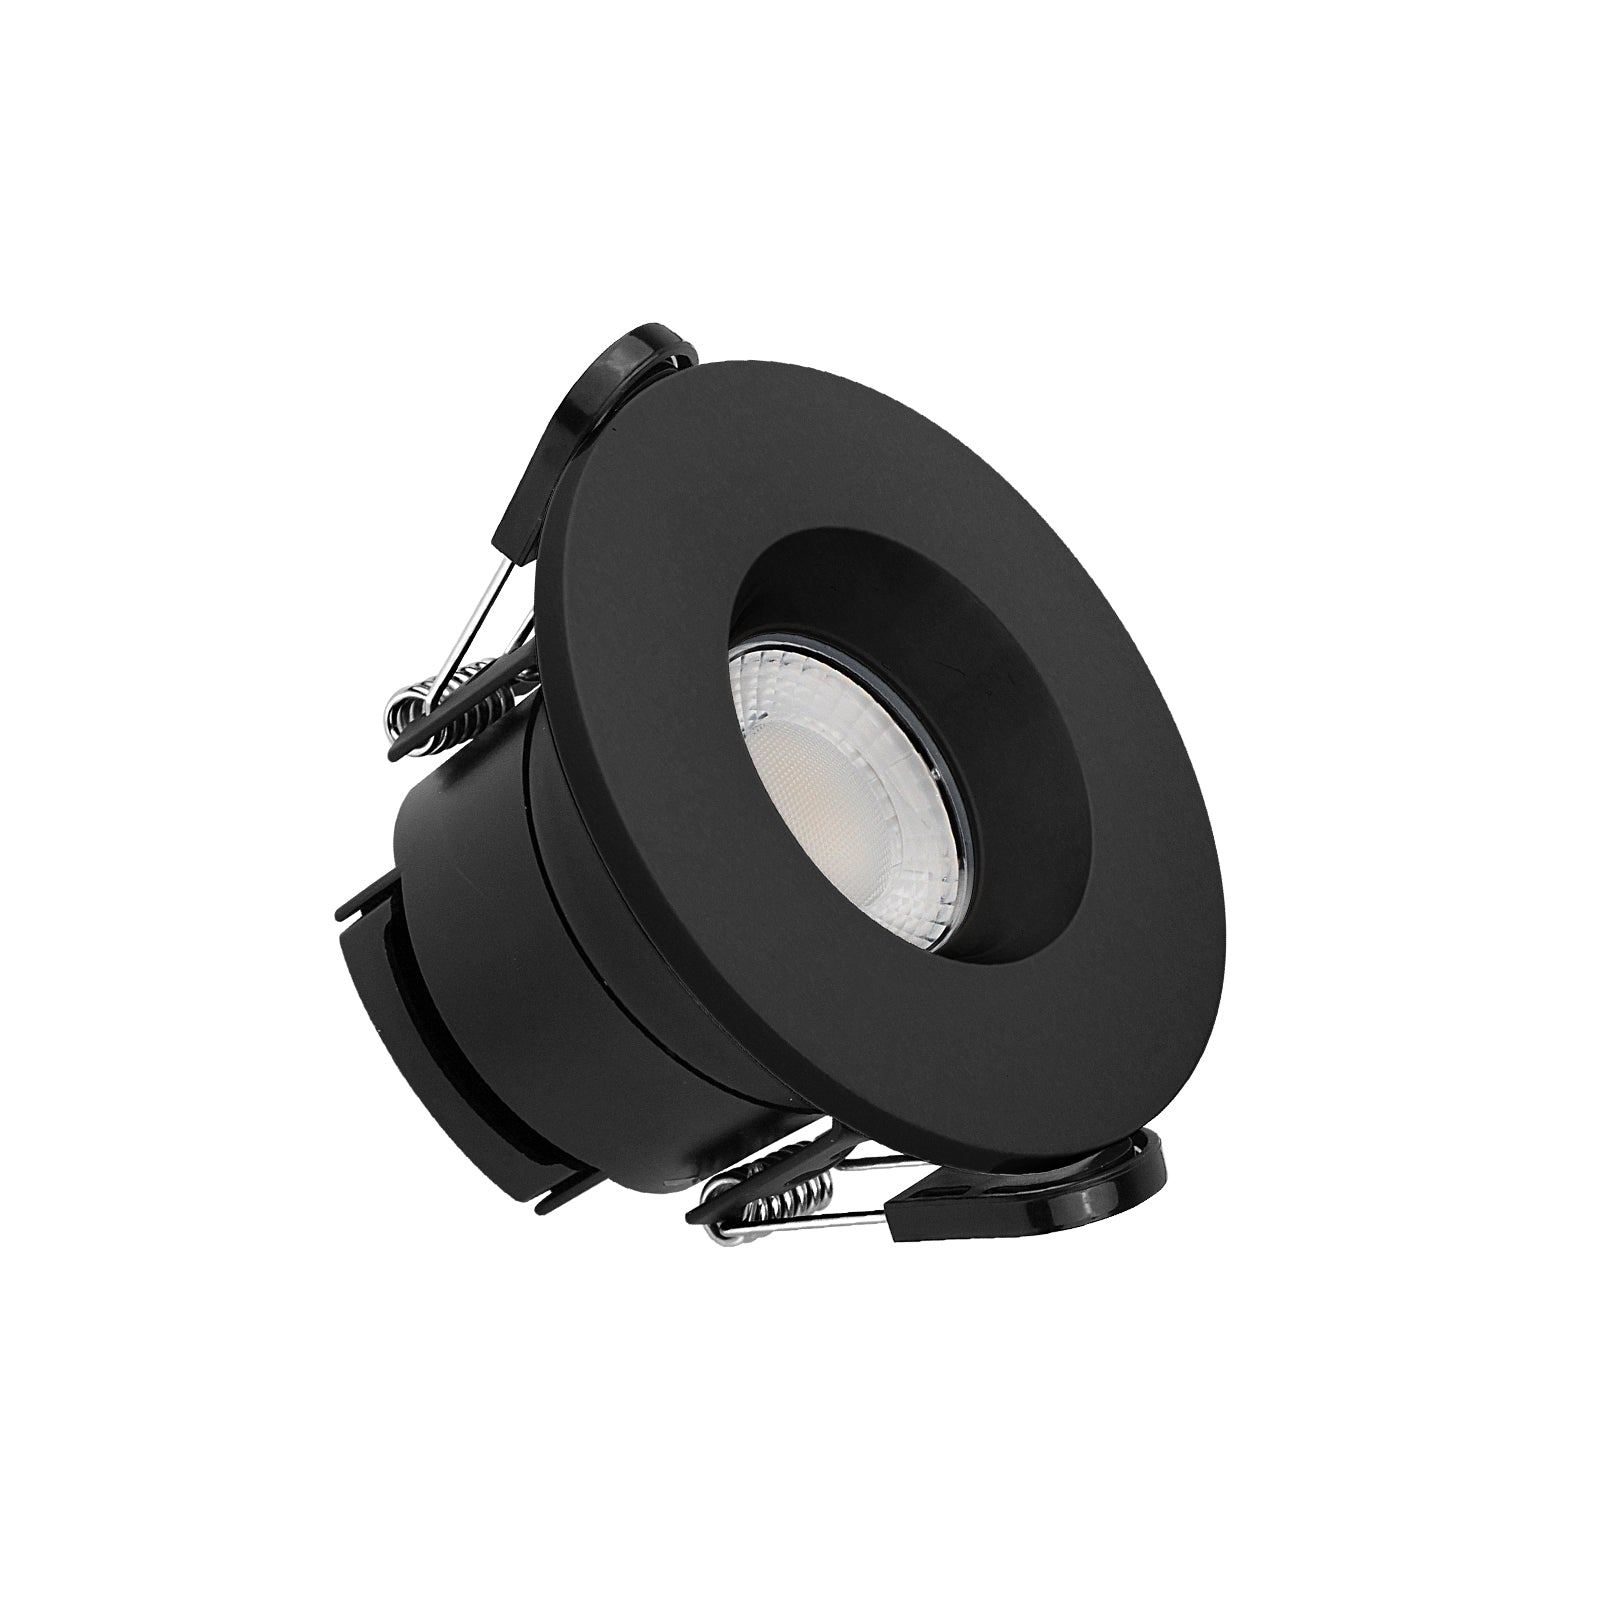 Paul Russells 6W LED Fire Rated Downlight, Dimmable Warm/Cool/Day White 3 Adjustable CCT, IP65, Black Bezel